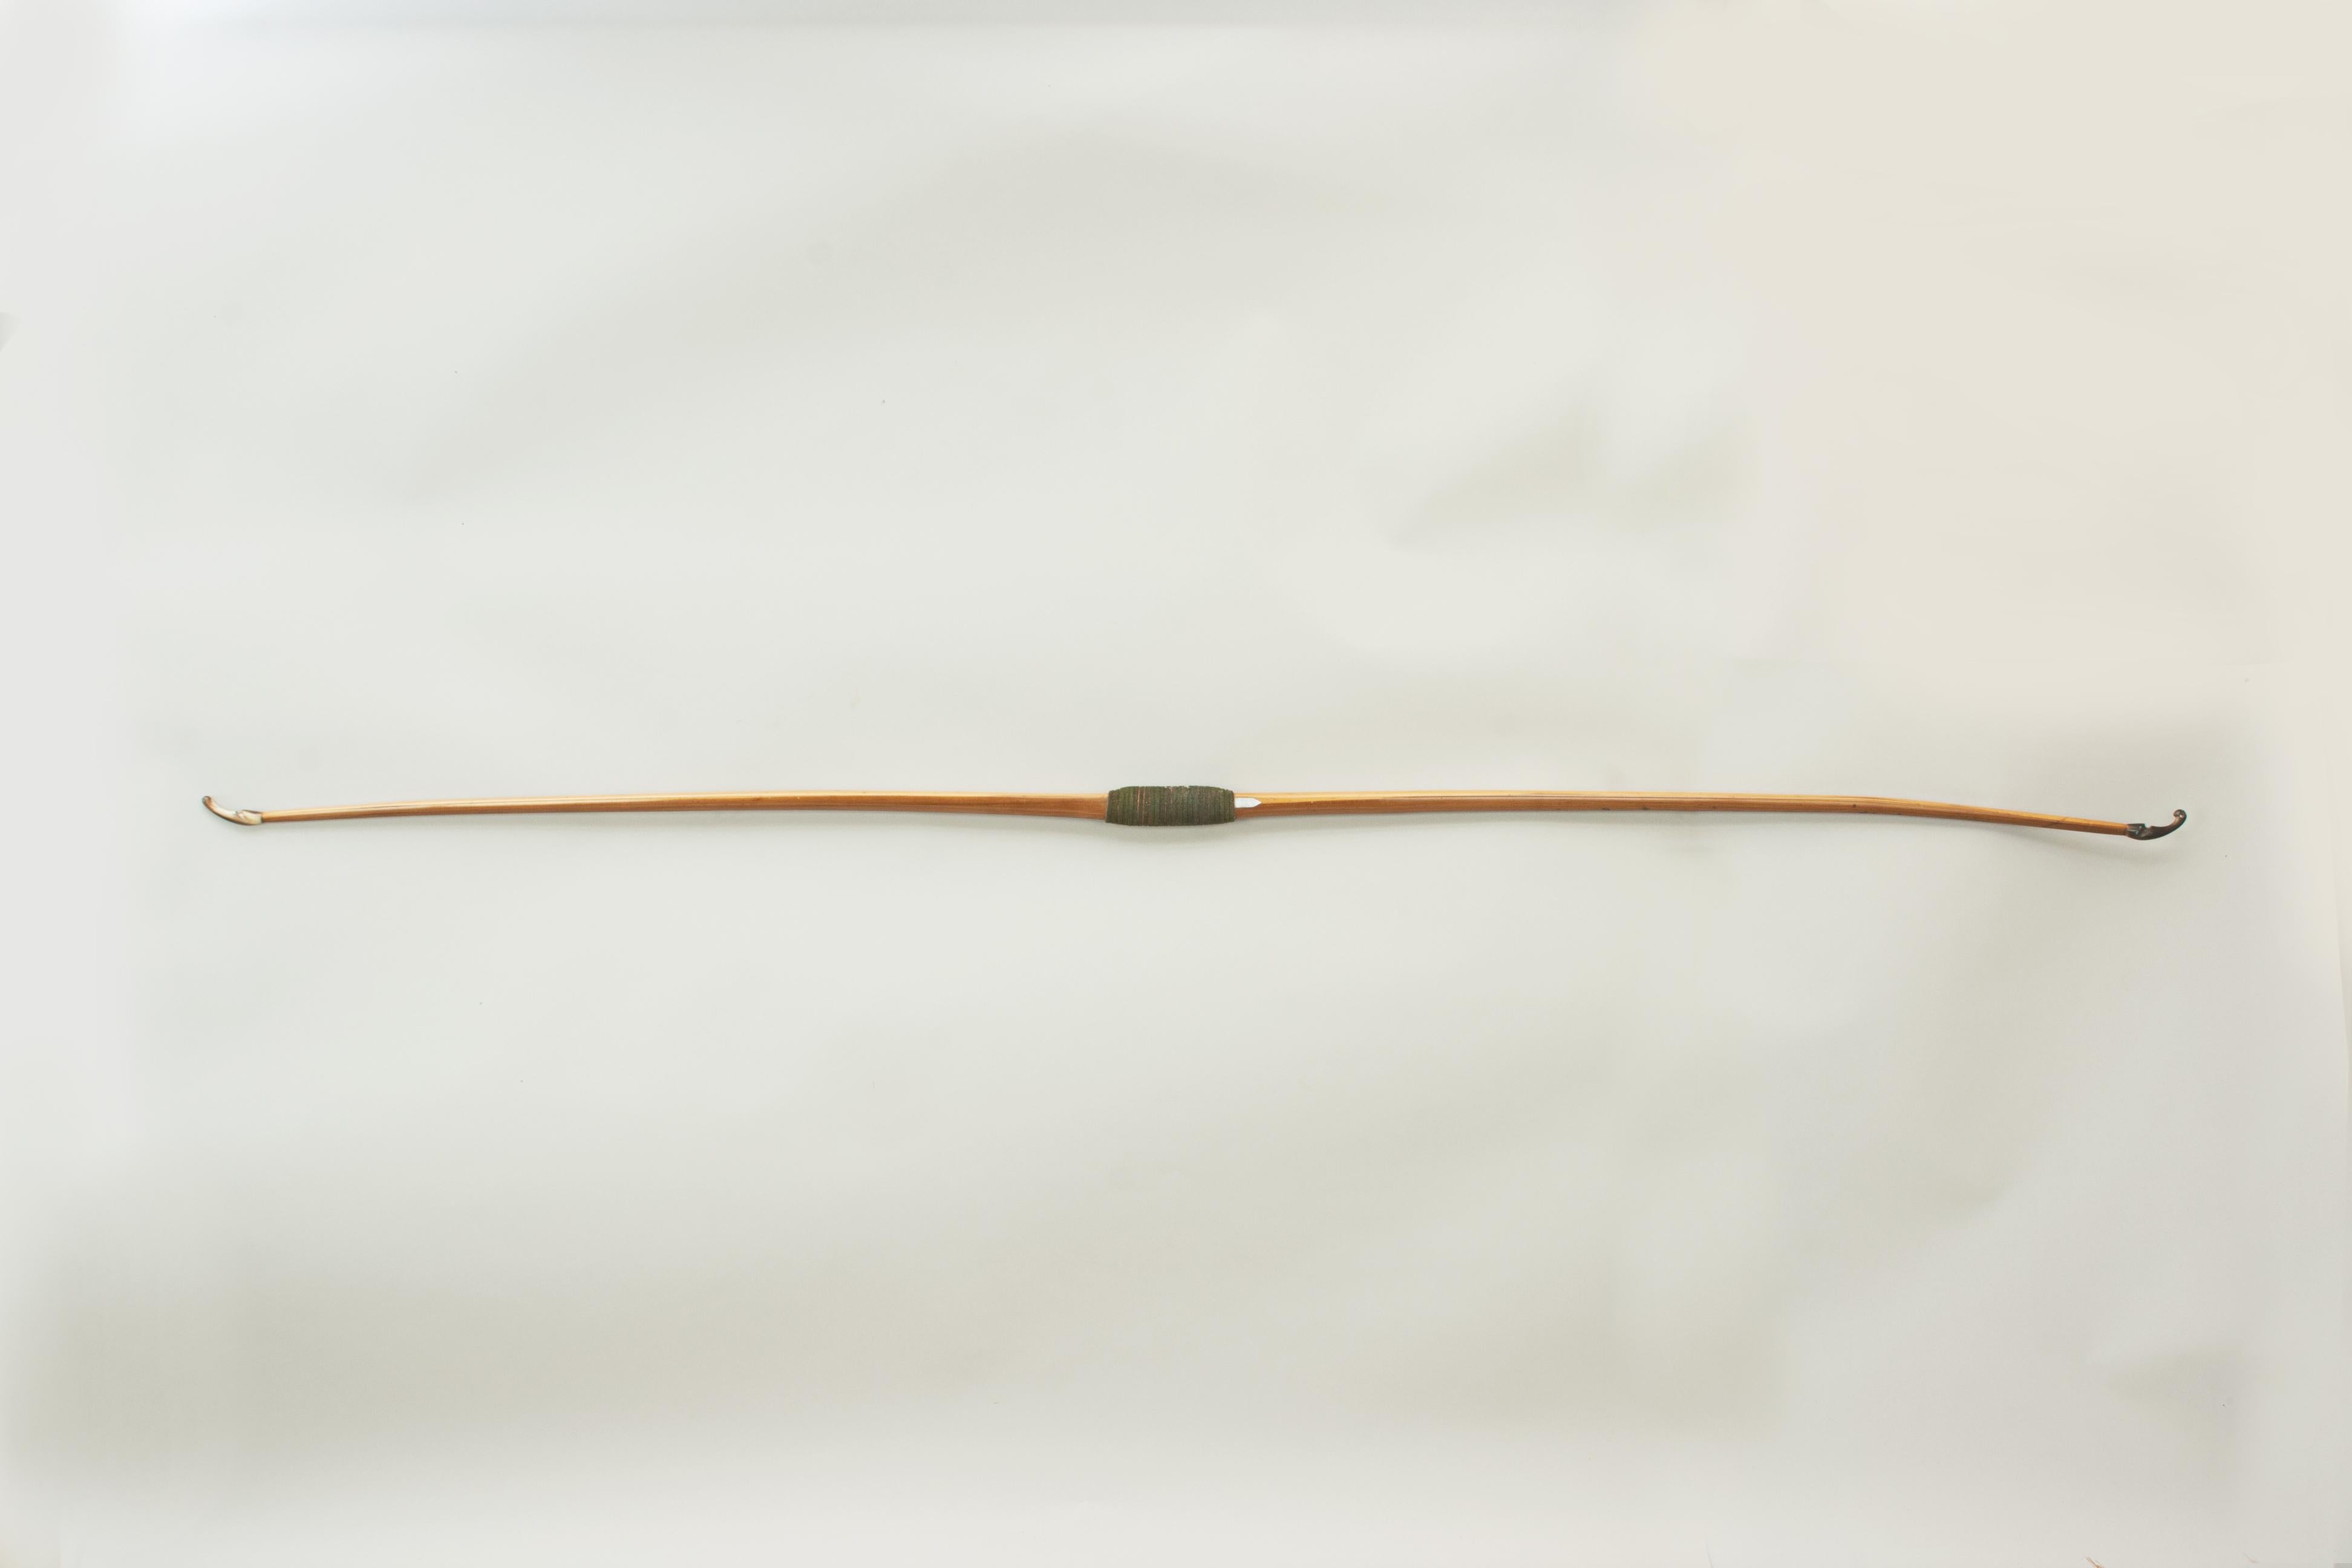 A beautiful ladies yew wood archery long bow by Thomas Aldred.
A very good yew wood archery bow produced by the workshops of Thomas Aldred, London, which operated from 1846-1918. The bow is fitted with horn nocks and a green fabric handle. Just